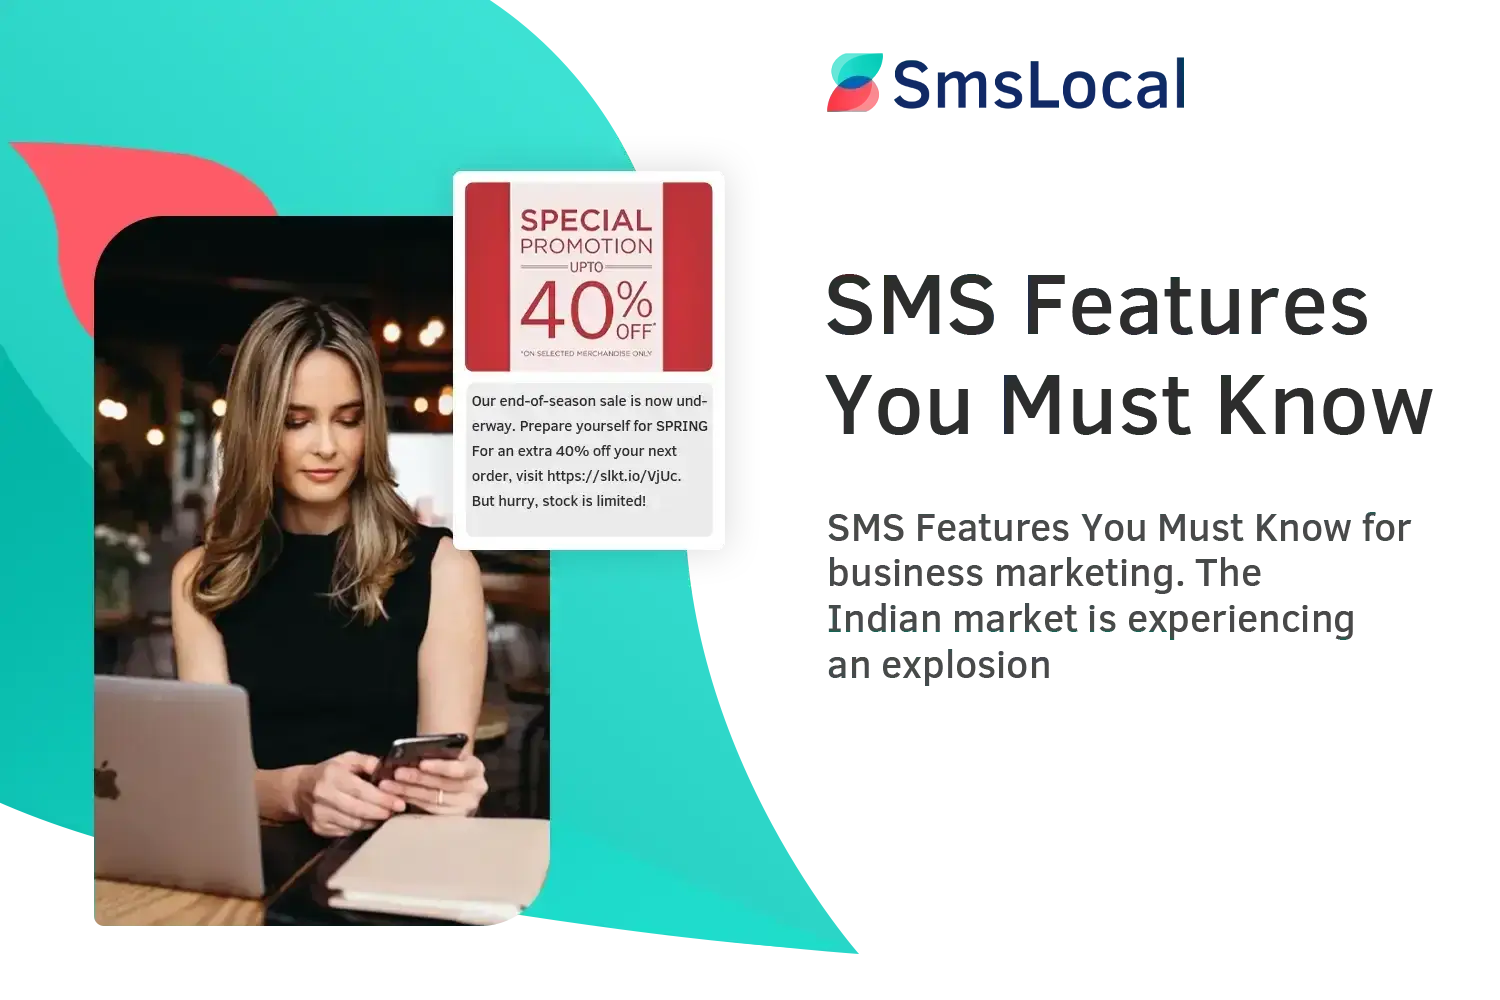 SMS Features